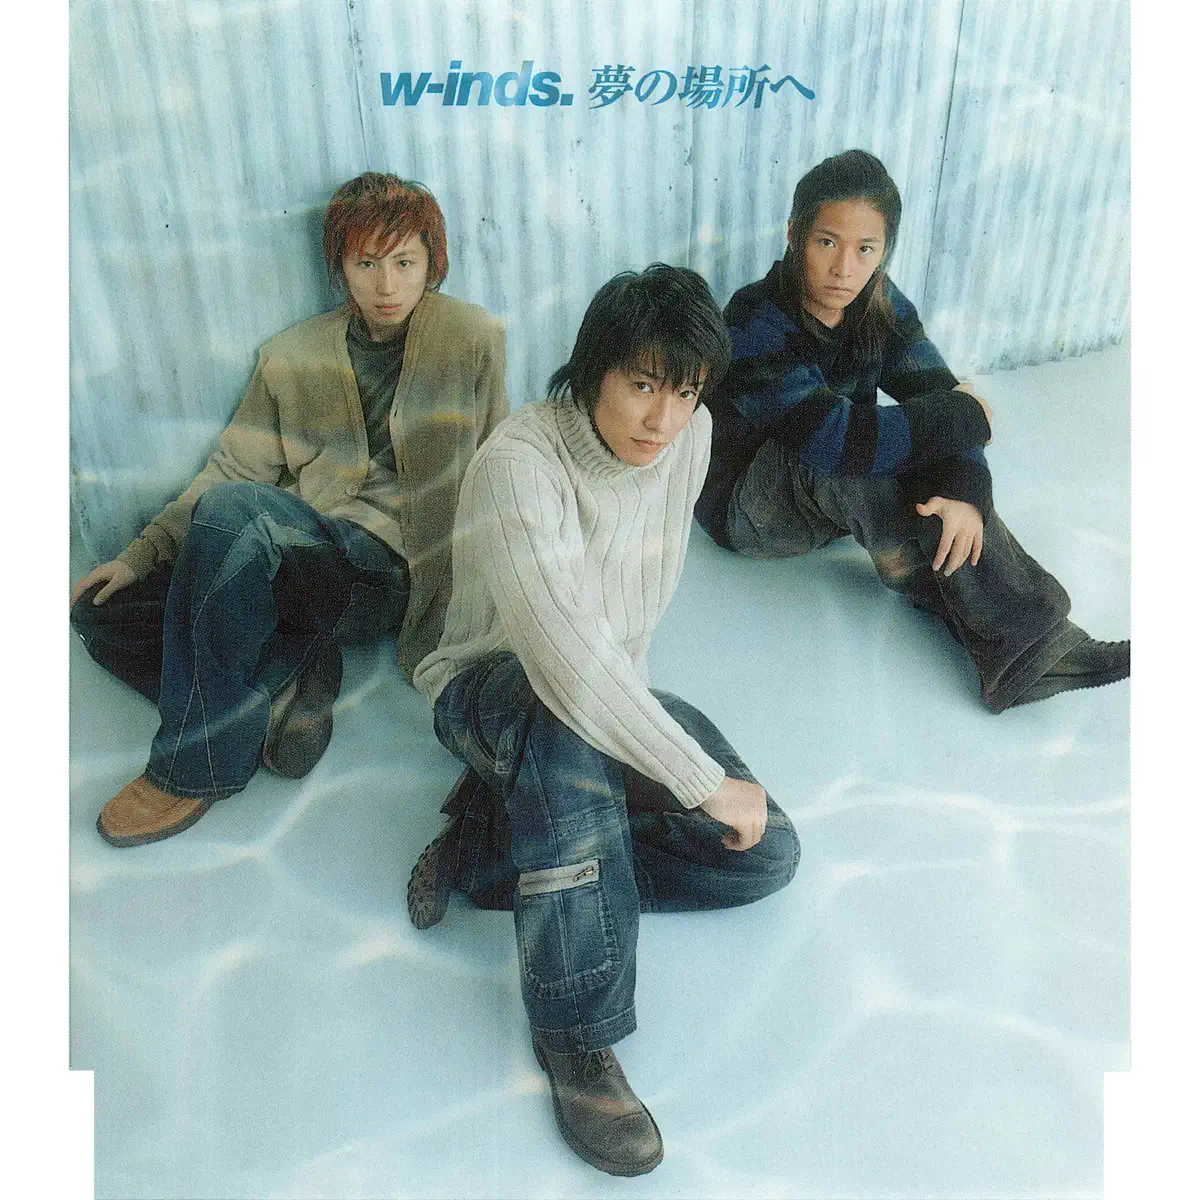 w-inds. - 夢の場所へ - EP (2005) [iTunes Plus AAC M4A]-新房子